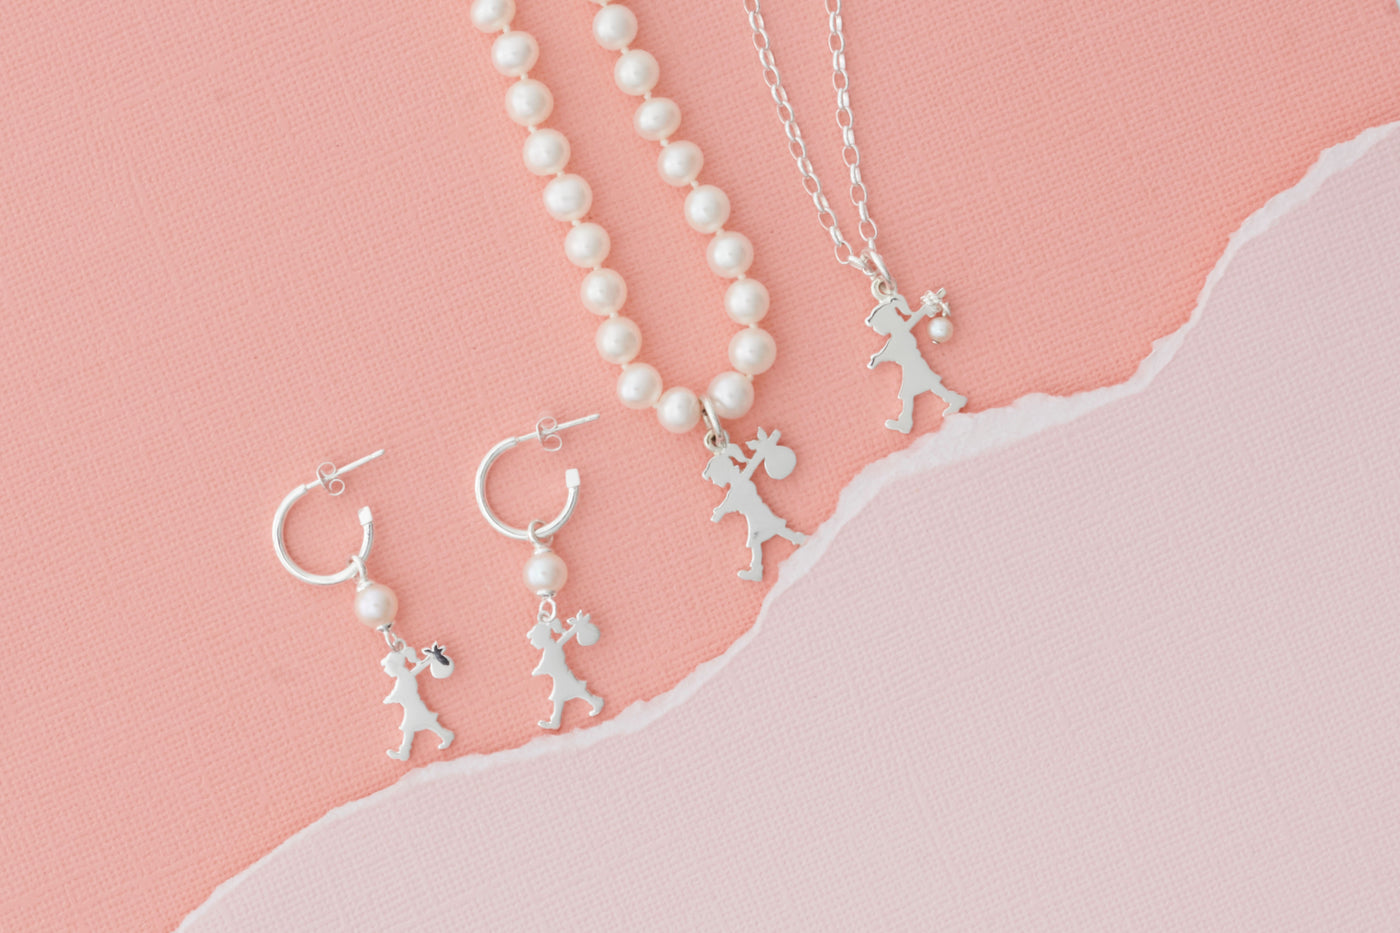 Karen Walker's Girl with a Pearl Earrings, Pearl Necklace, and Sterling Silver Necklace all sit together on a pale pink background, clearly off on their latest adventure!